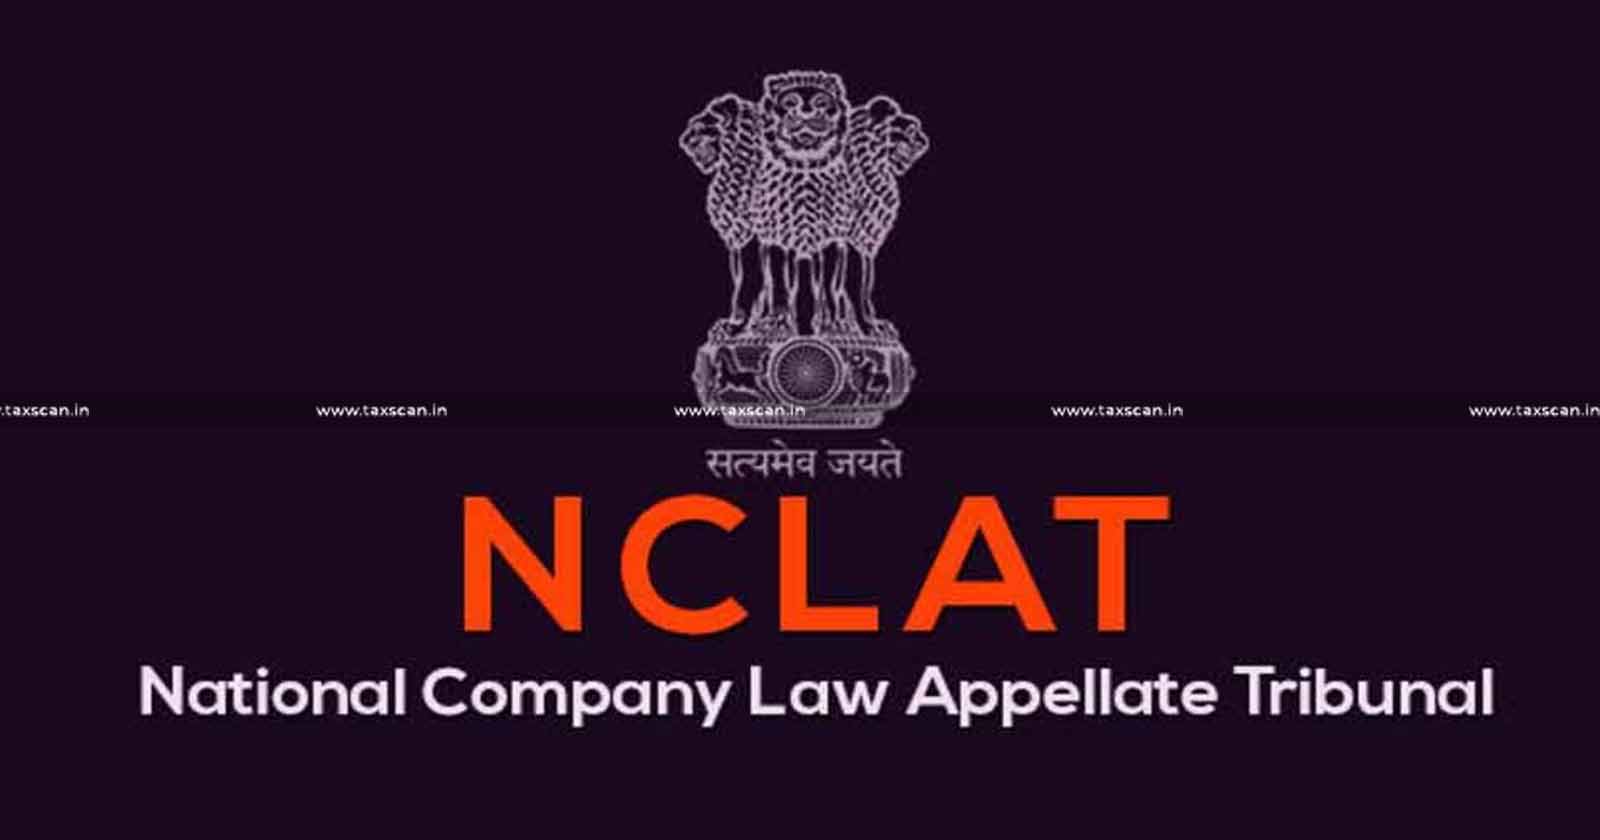 NCLT - National Company Law Tribunal - Committee of Creditors - CoC - CoC considerations - Suspended management settlement - taxscan